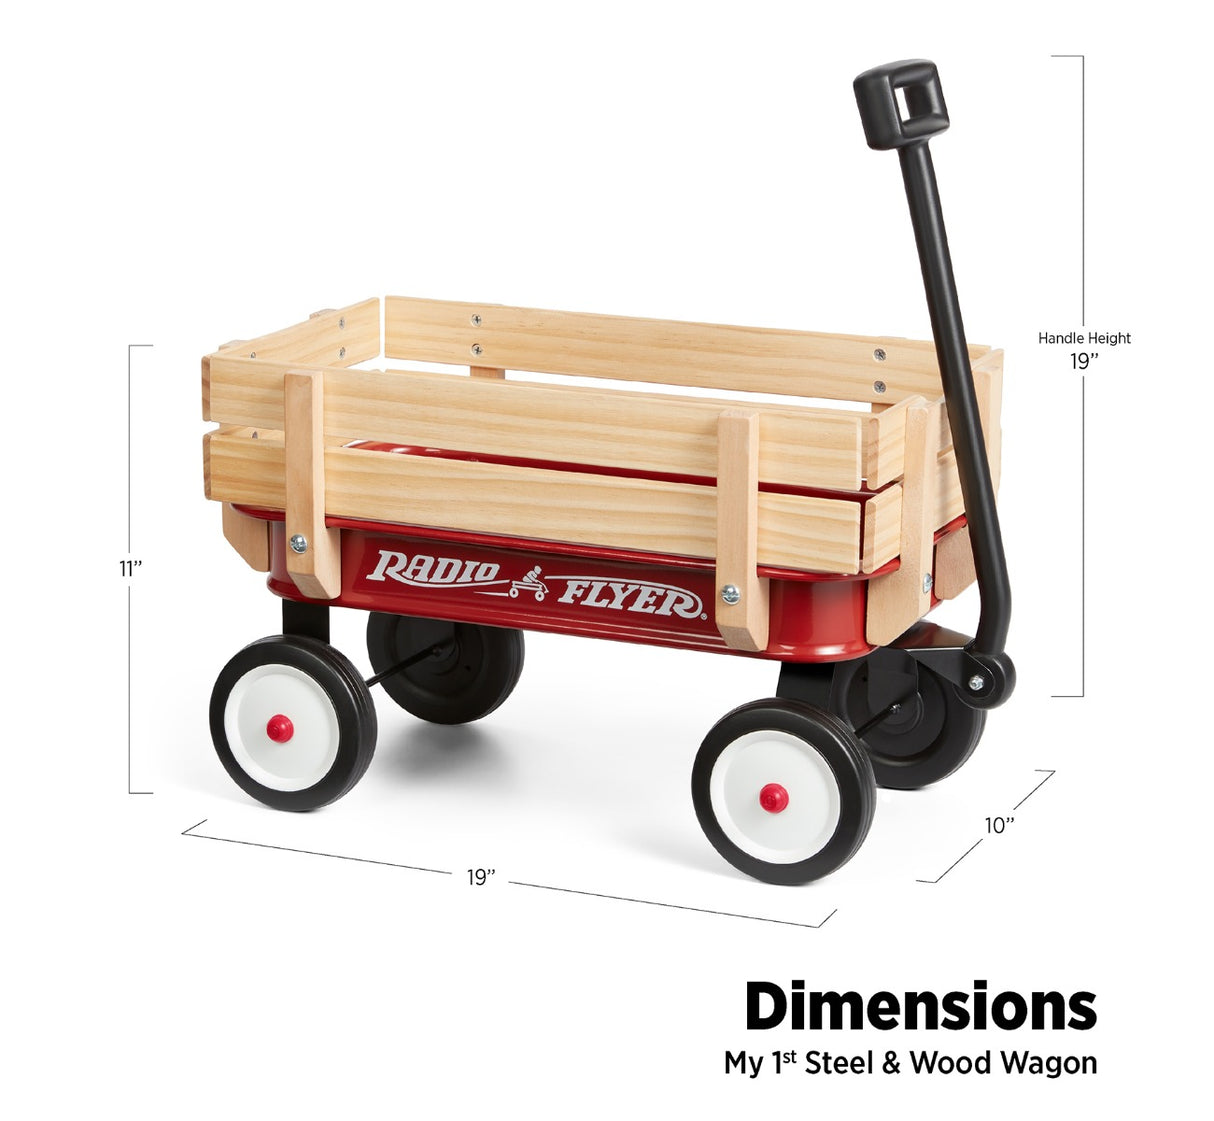 Dimensions:19" x 10" x 11"19" Handle Height